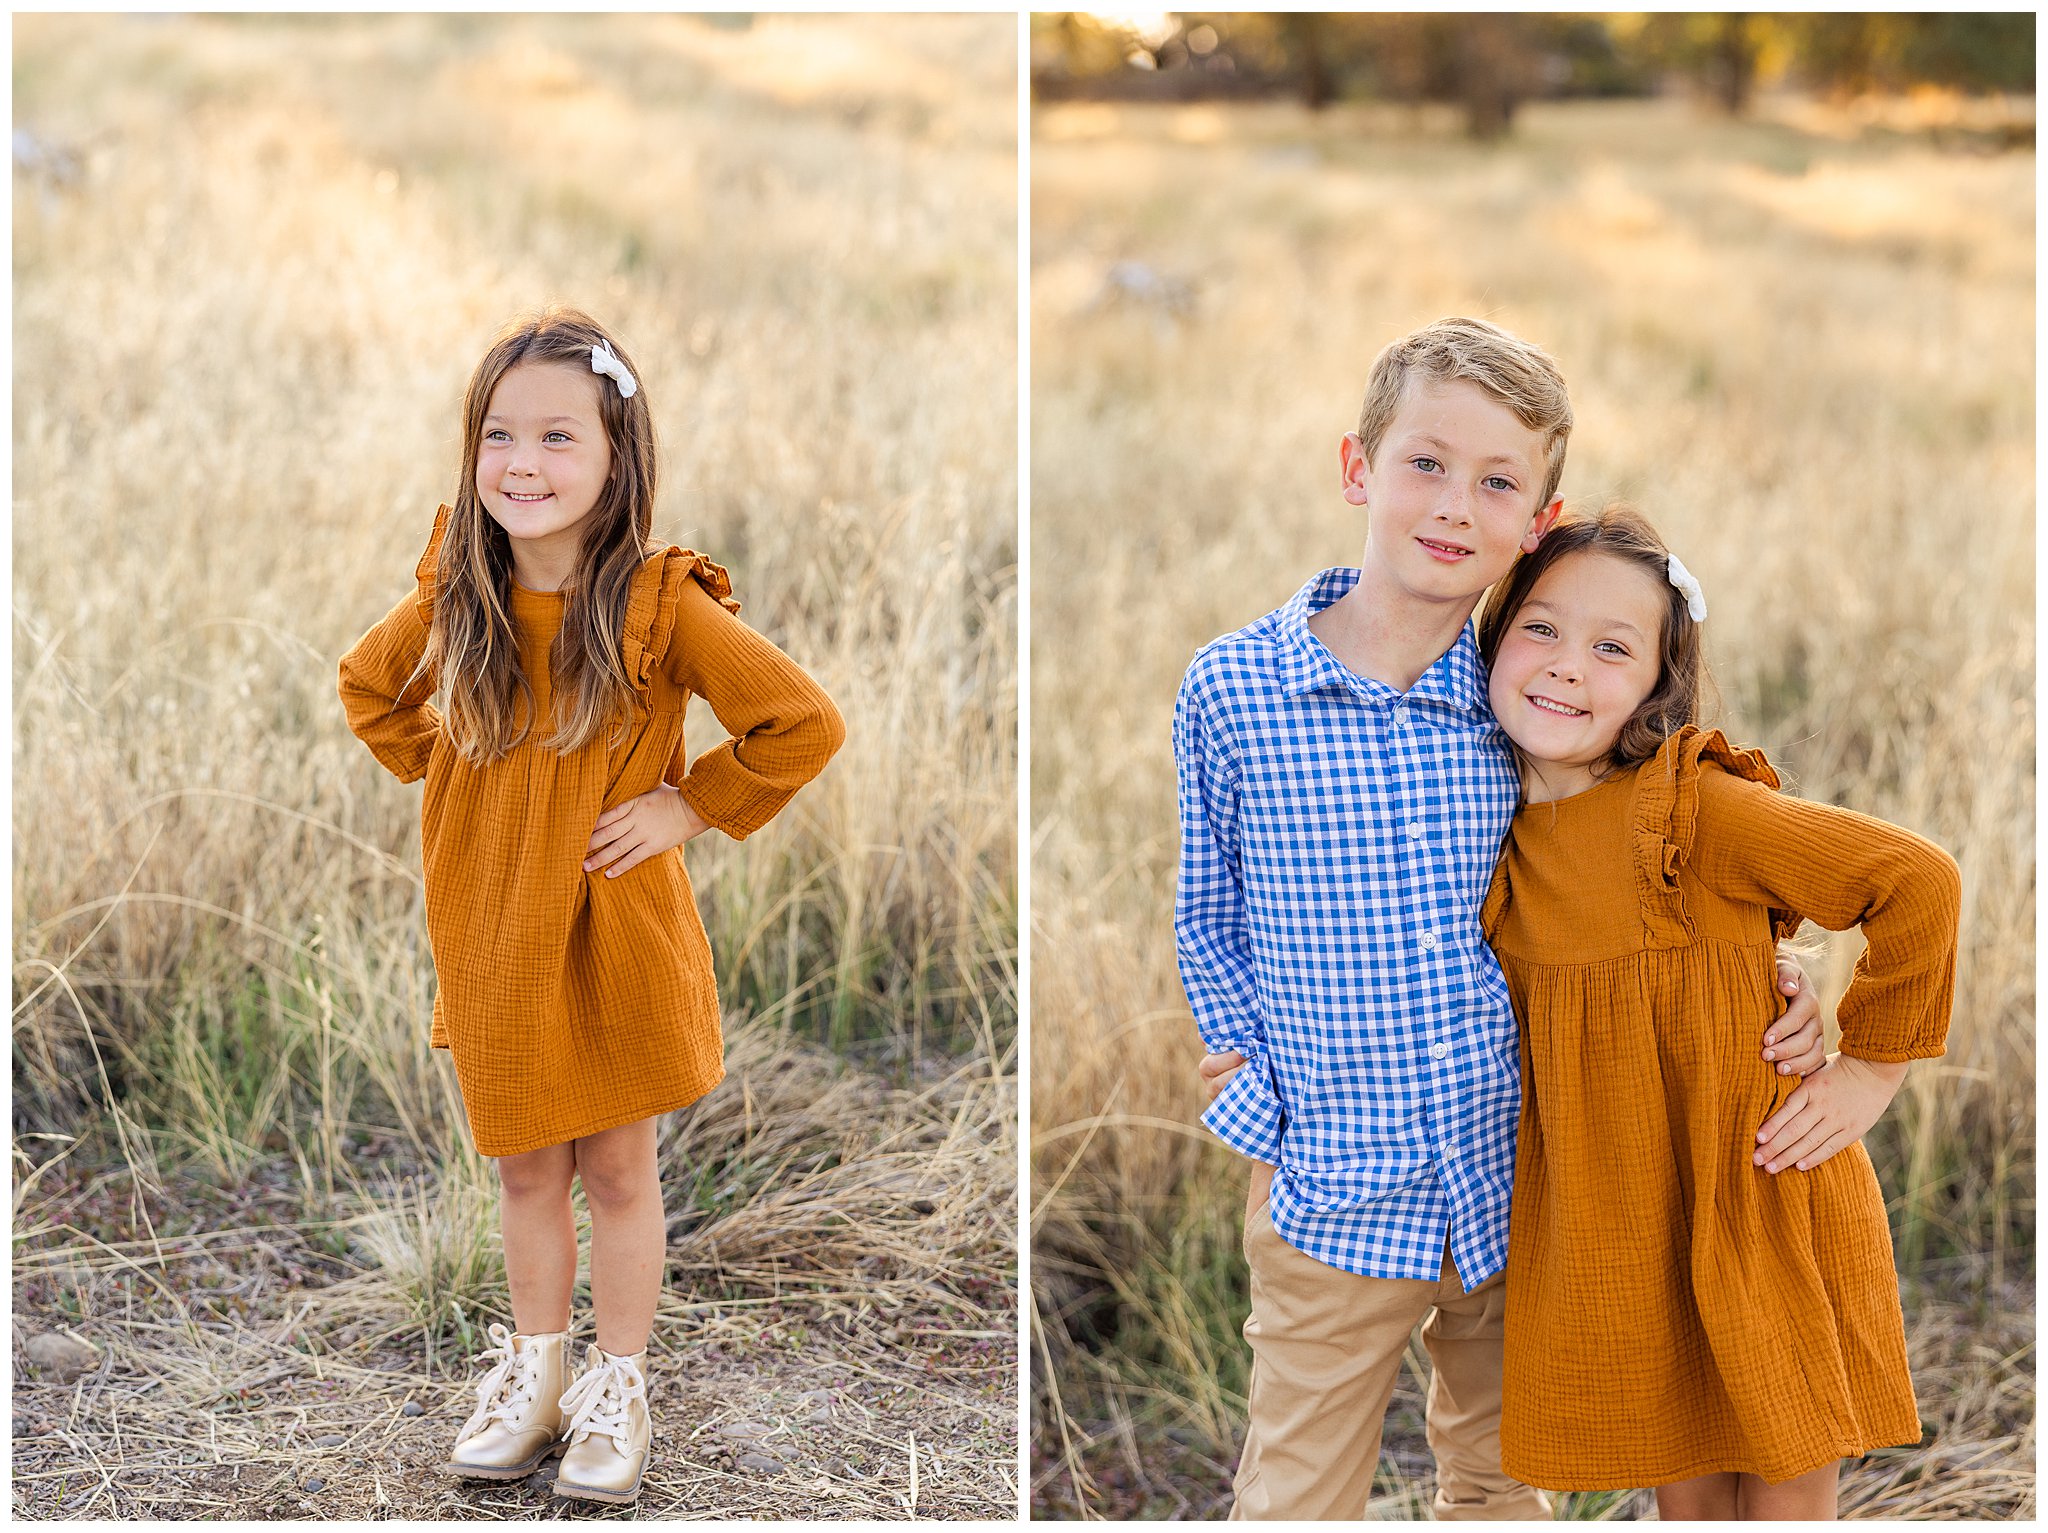 Grass Field Fall Mini Sessions Chico CA October Family Maternity Gender Reveal Baby Siblings Dog,